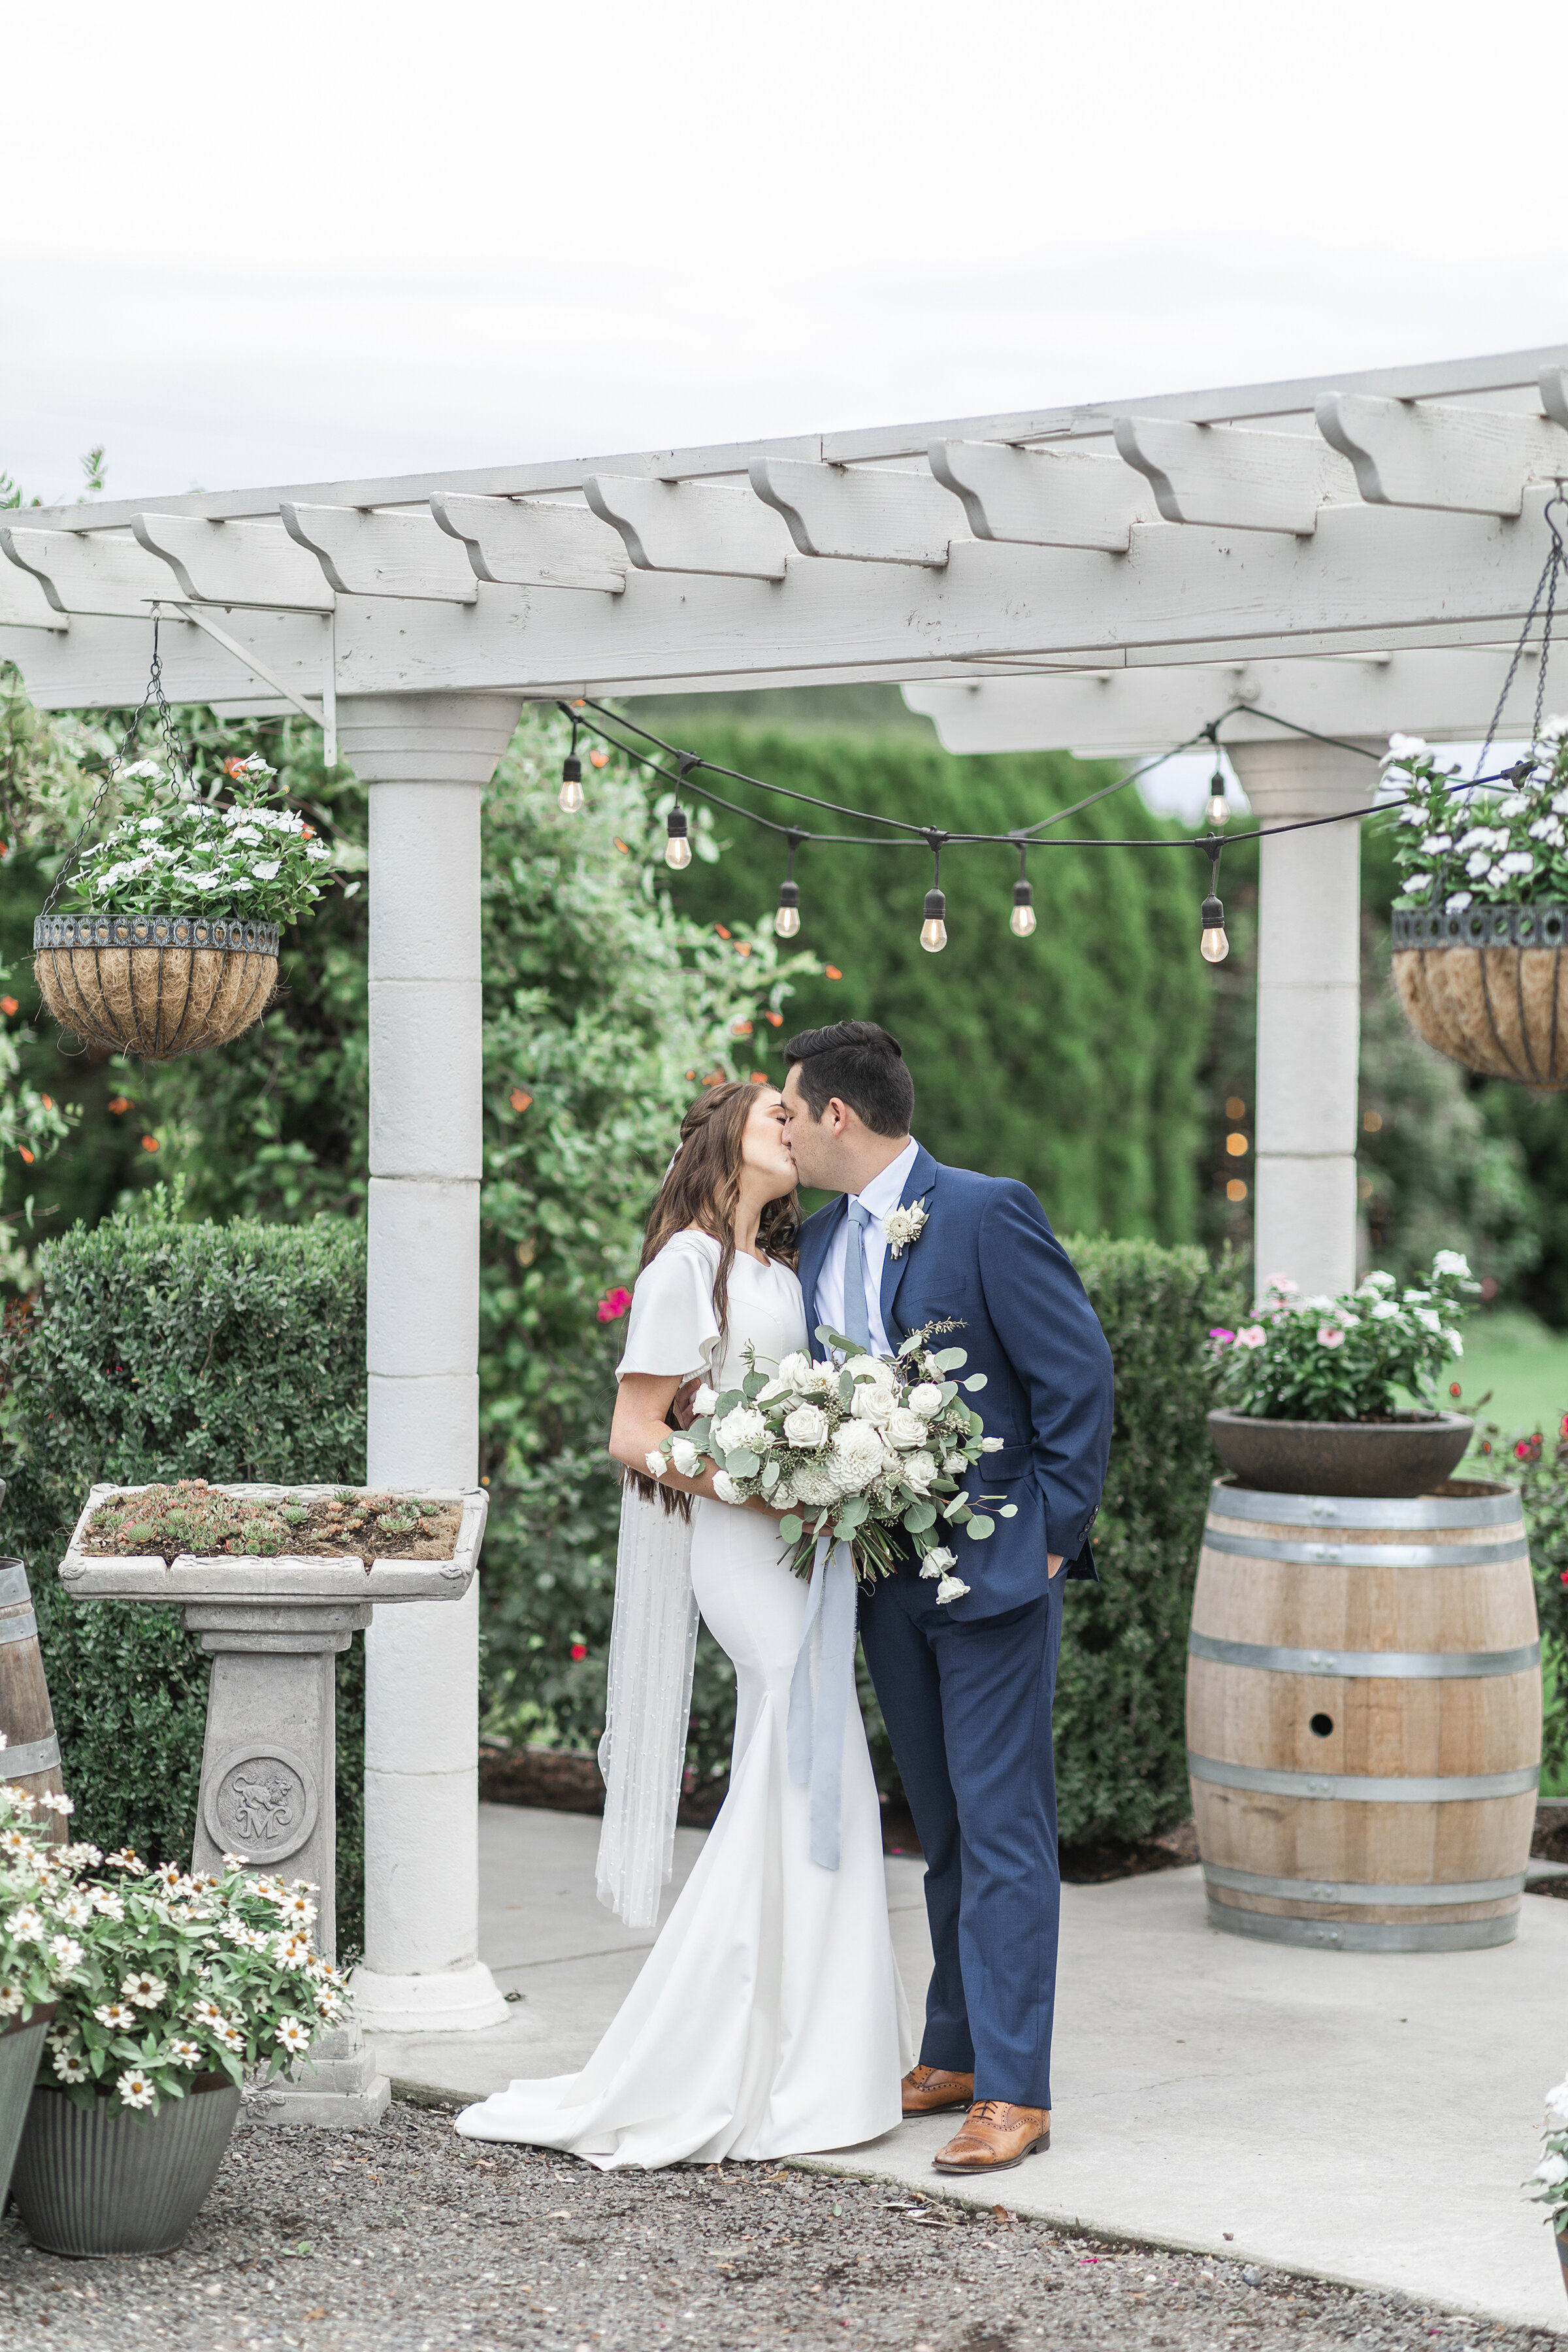  Posed beneath a white gazebo, Clarity Lane Photography captures this newlywed Salt Lake City, Utah couple. calf length wedding veil, flutter sleeve wedding dress, white wedding bouquet, white gazebo, navy wedding suit, leather brown wedding shoes, p